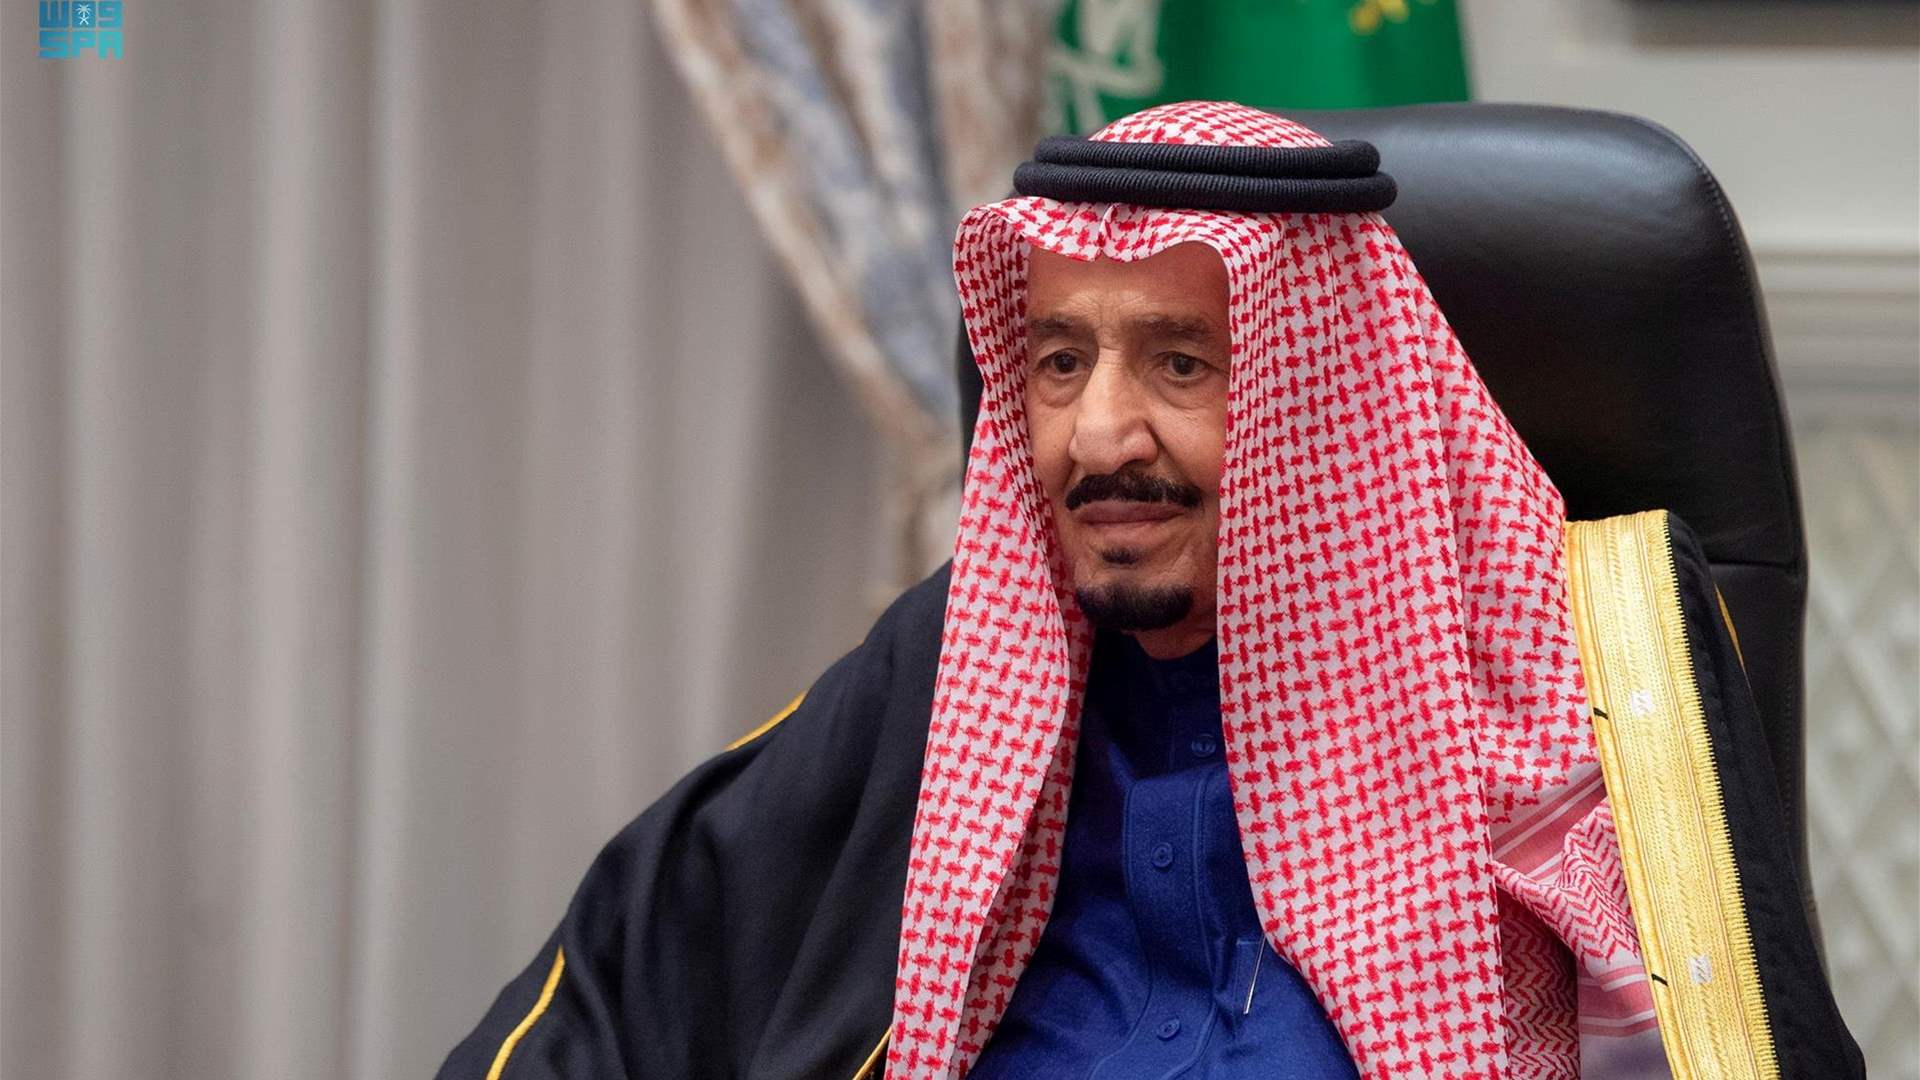 Saudi Arabia&#39;s King to undergo tests due to high fever, state news agency reports